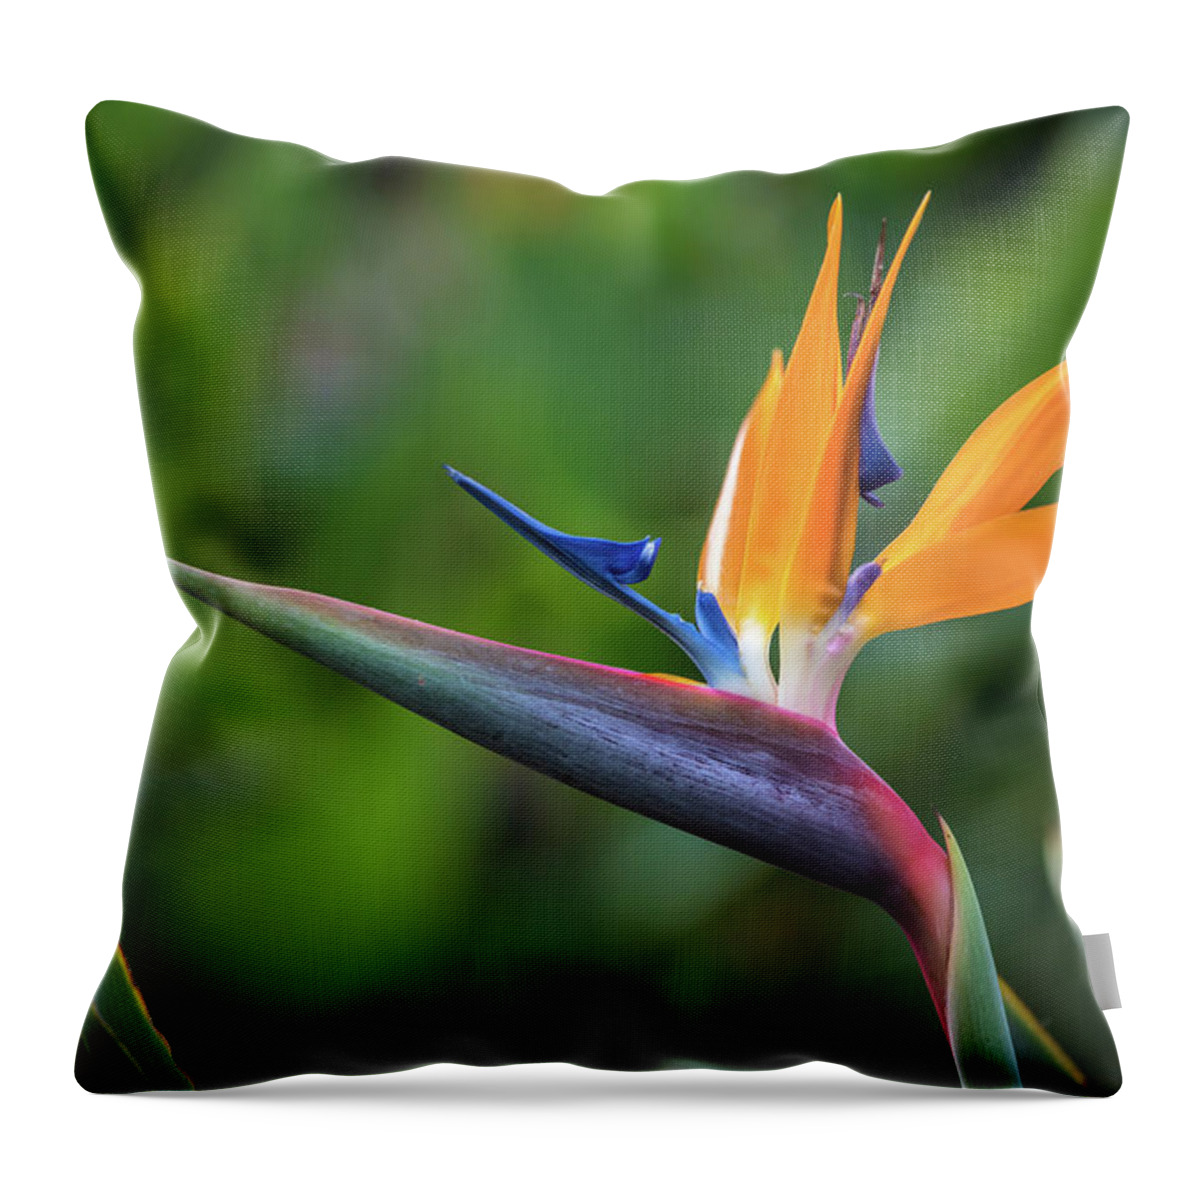 Bird Of Paradise Throw Pillow featuring the photograph Bird of Paradise Flower by Pierre Leclerc Photography